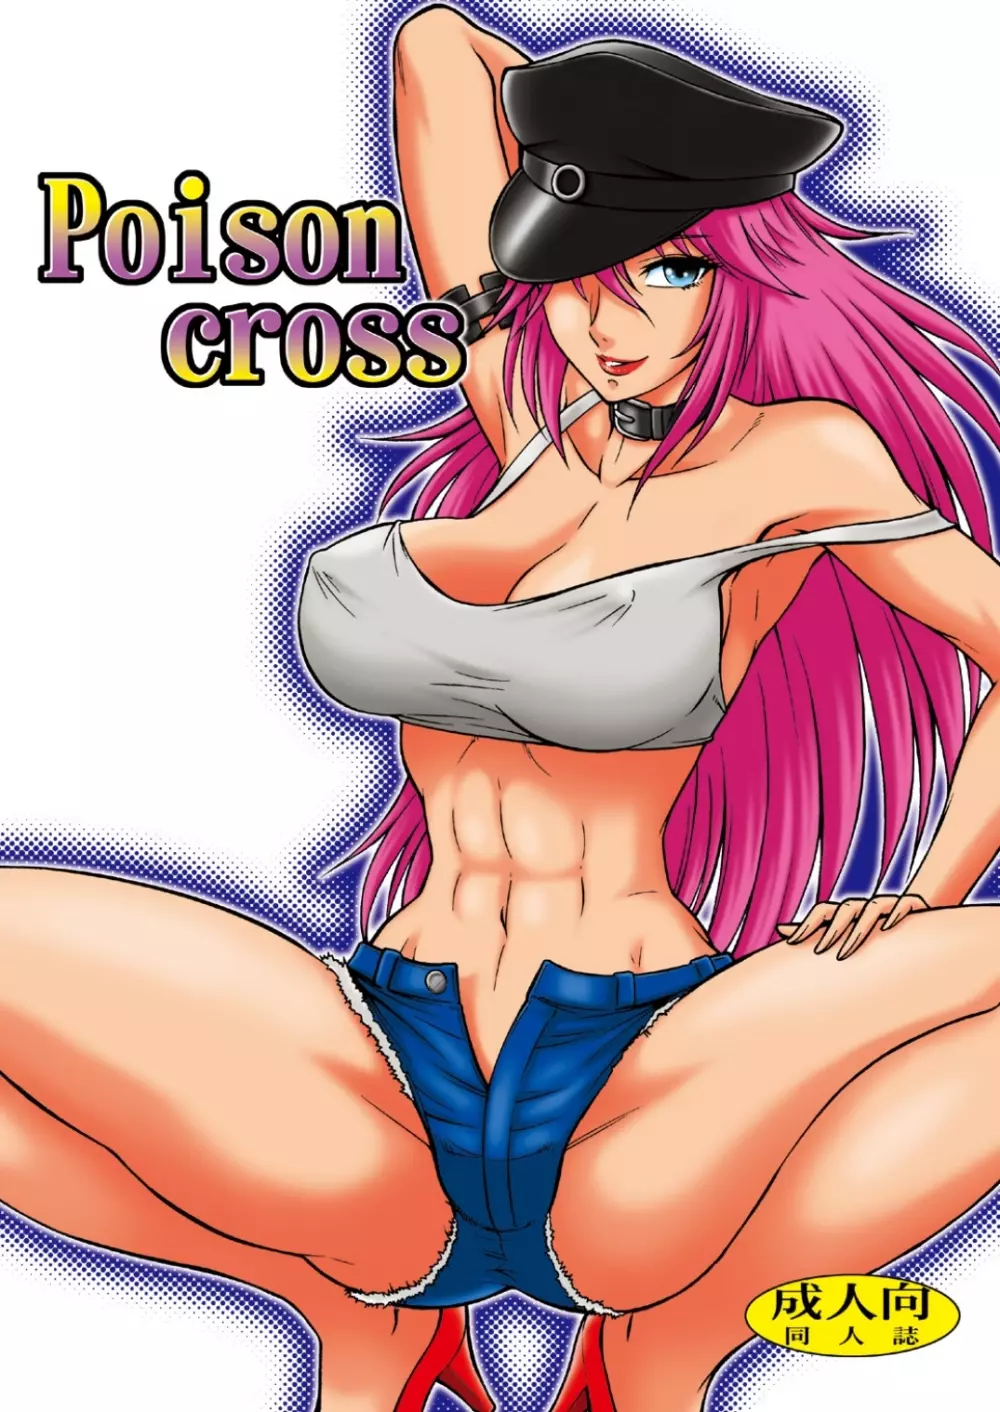 Poison cross - page1